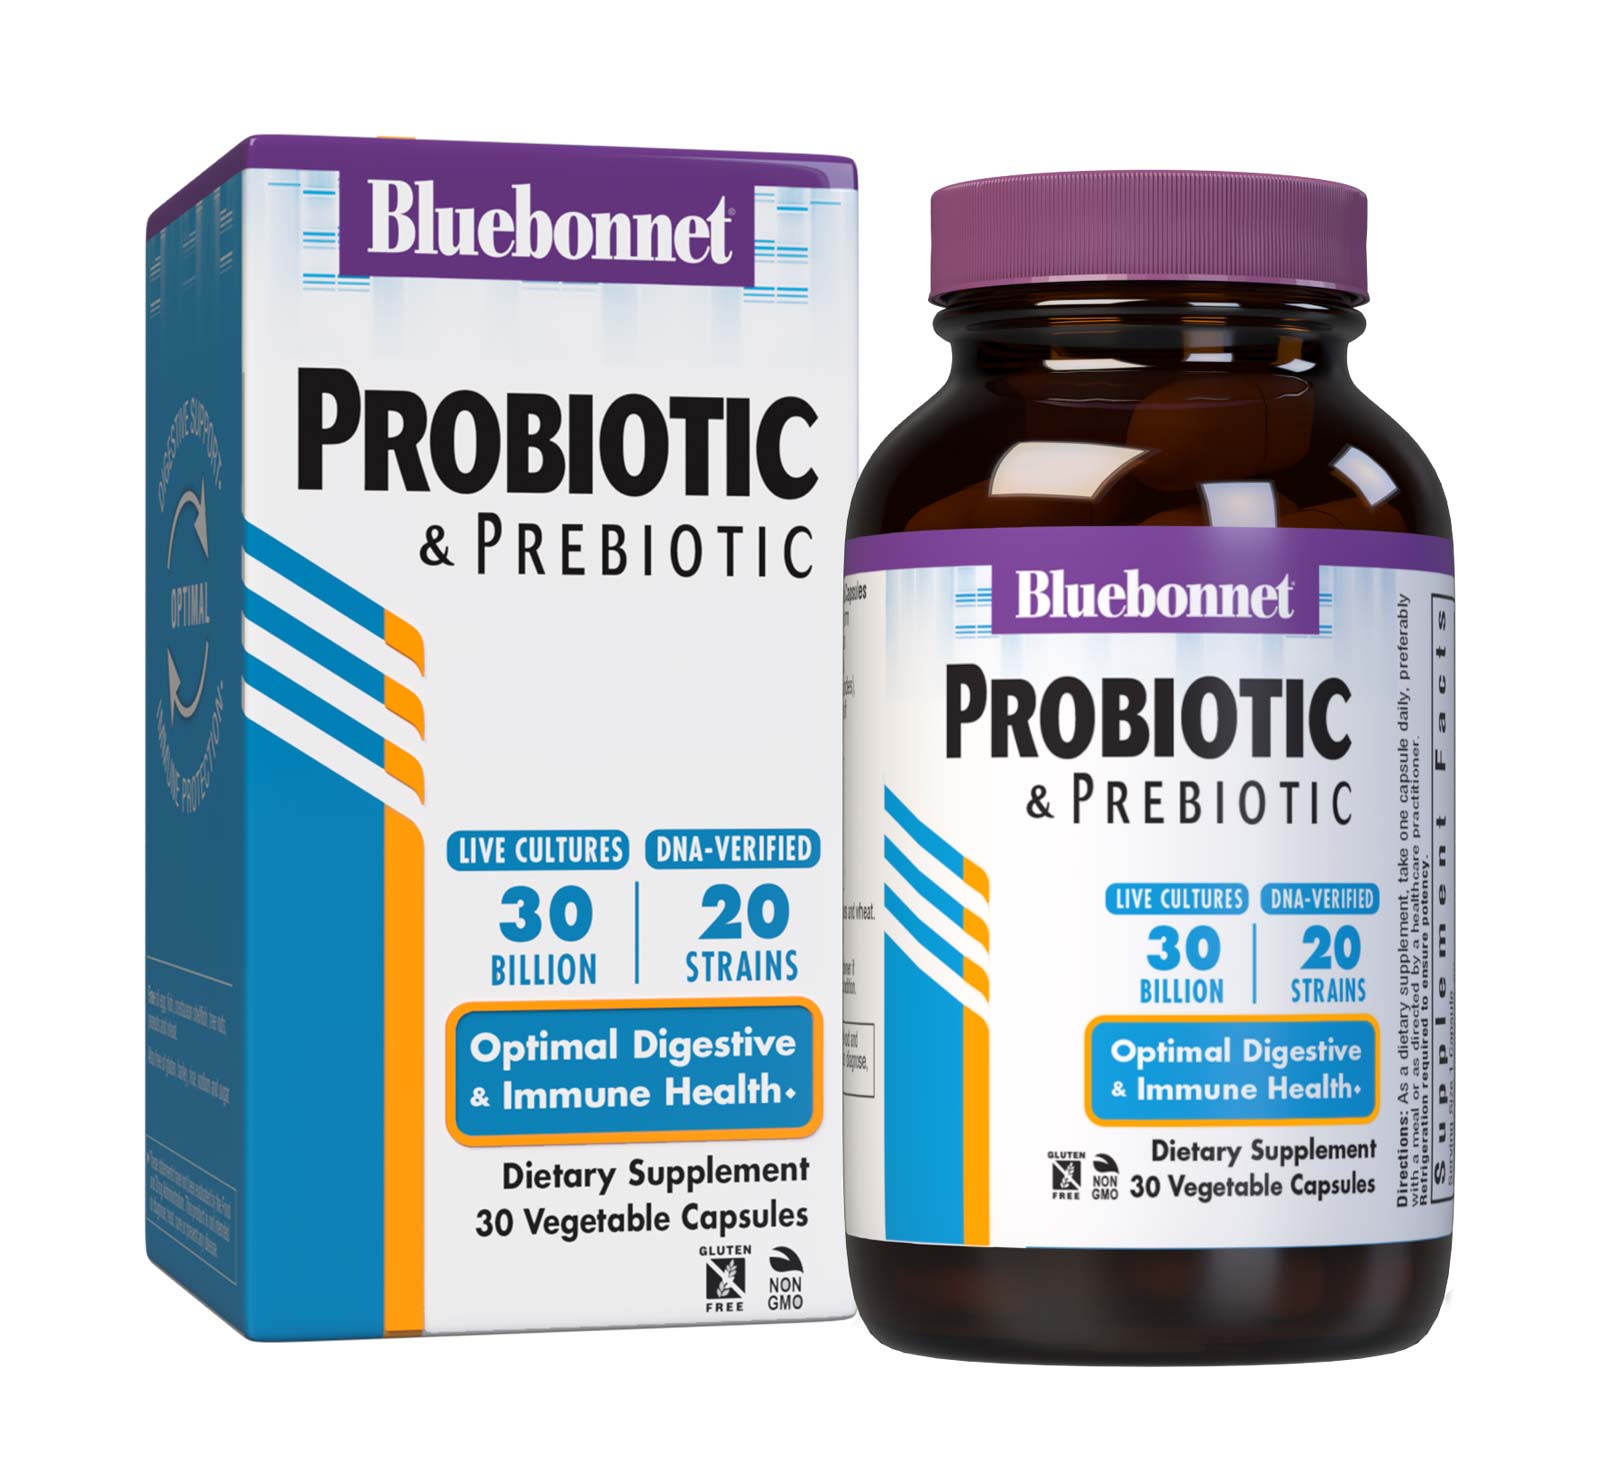 Bluebonnet’s Probiotic & Prebiotic 30 Vegetable Capsules are formulated with 30 billion viable cultures from 20 DNA-verified, scientifically supported strains. This unique, science-based probiotic formula includes the prebiotic inulin from chicory root extract, to assist the growth of friendly bacterium in the gut. with Box. #size_30 count